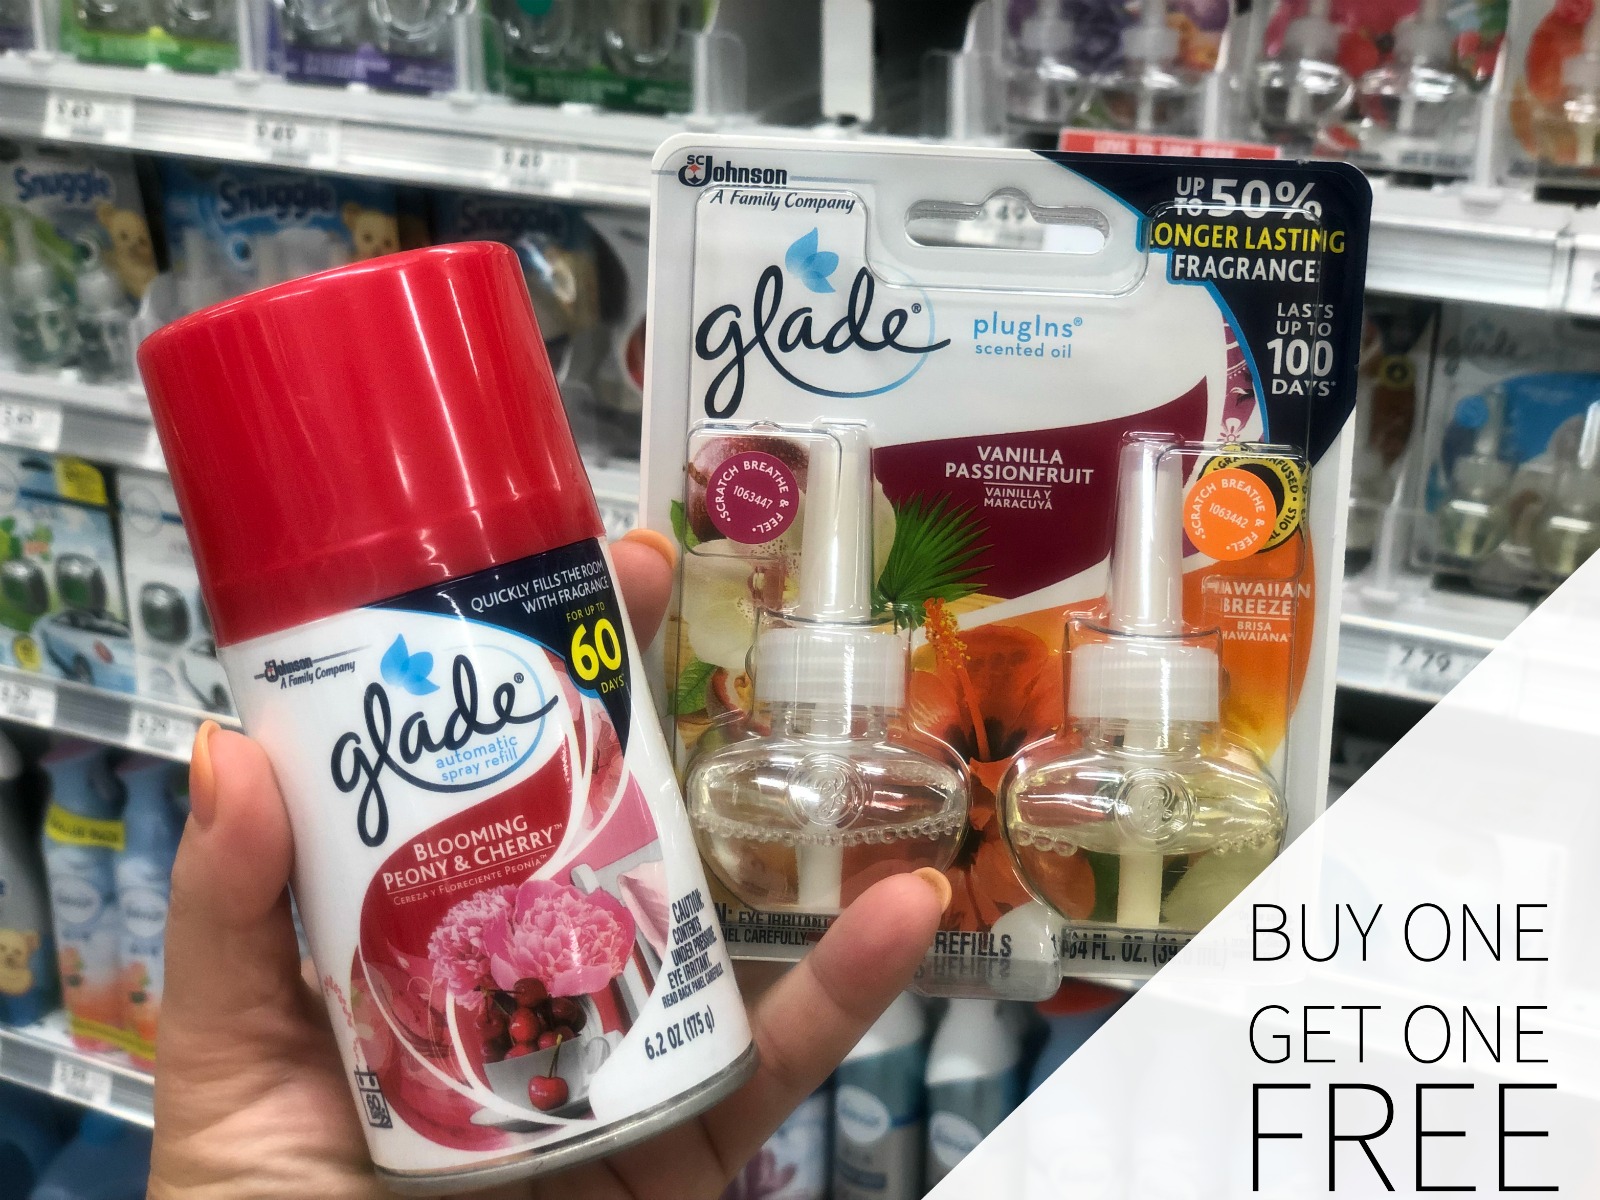 Enhance The Season With The Authentic Scents Of Fall - Select Glade® Products On Sale Buy One, Get One FREE! on I Heart Publix 1